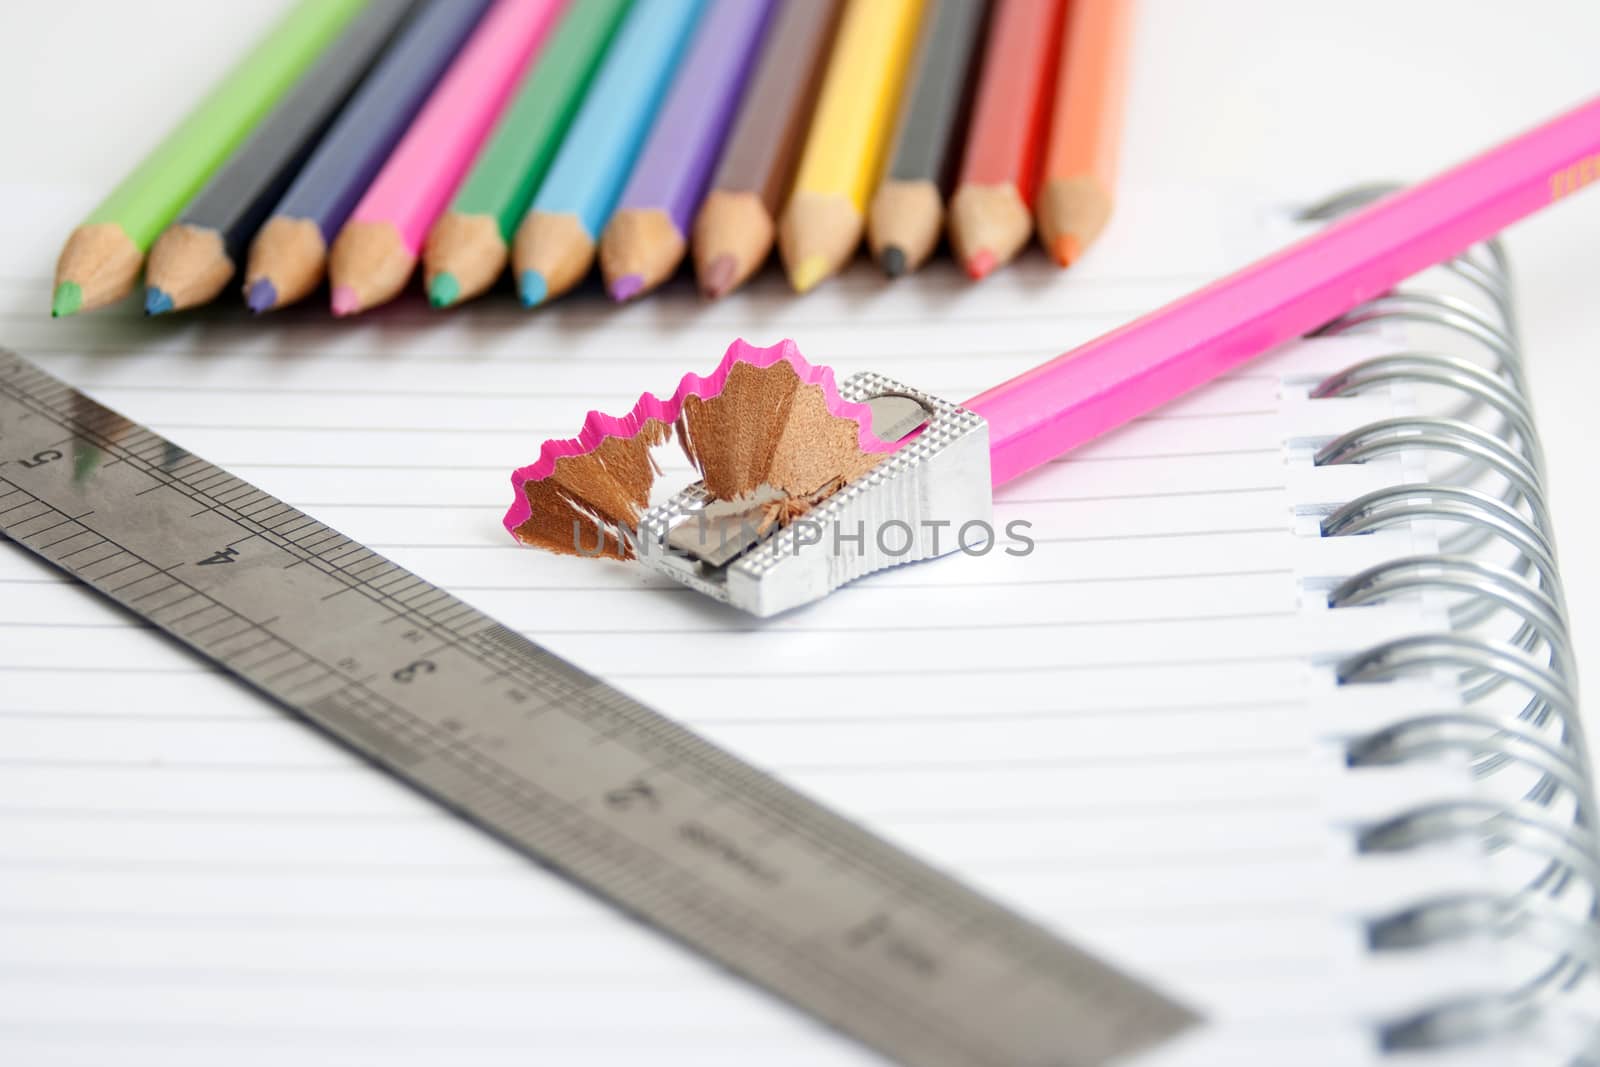 colored pencils on a note pad with a ruler on white background